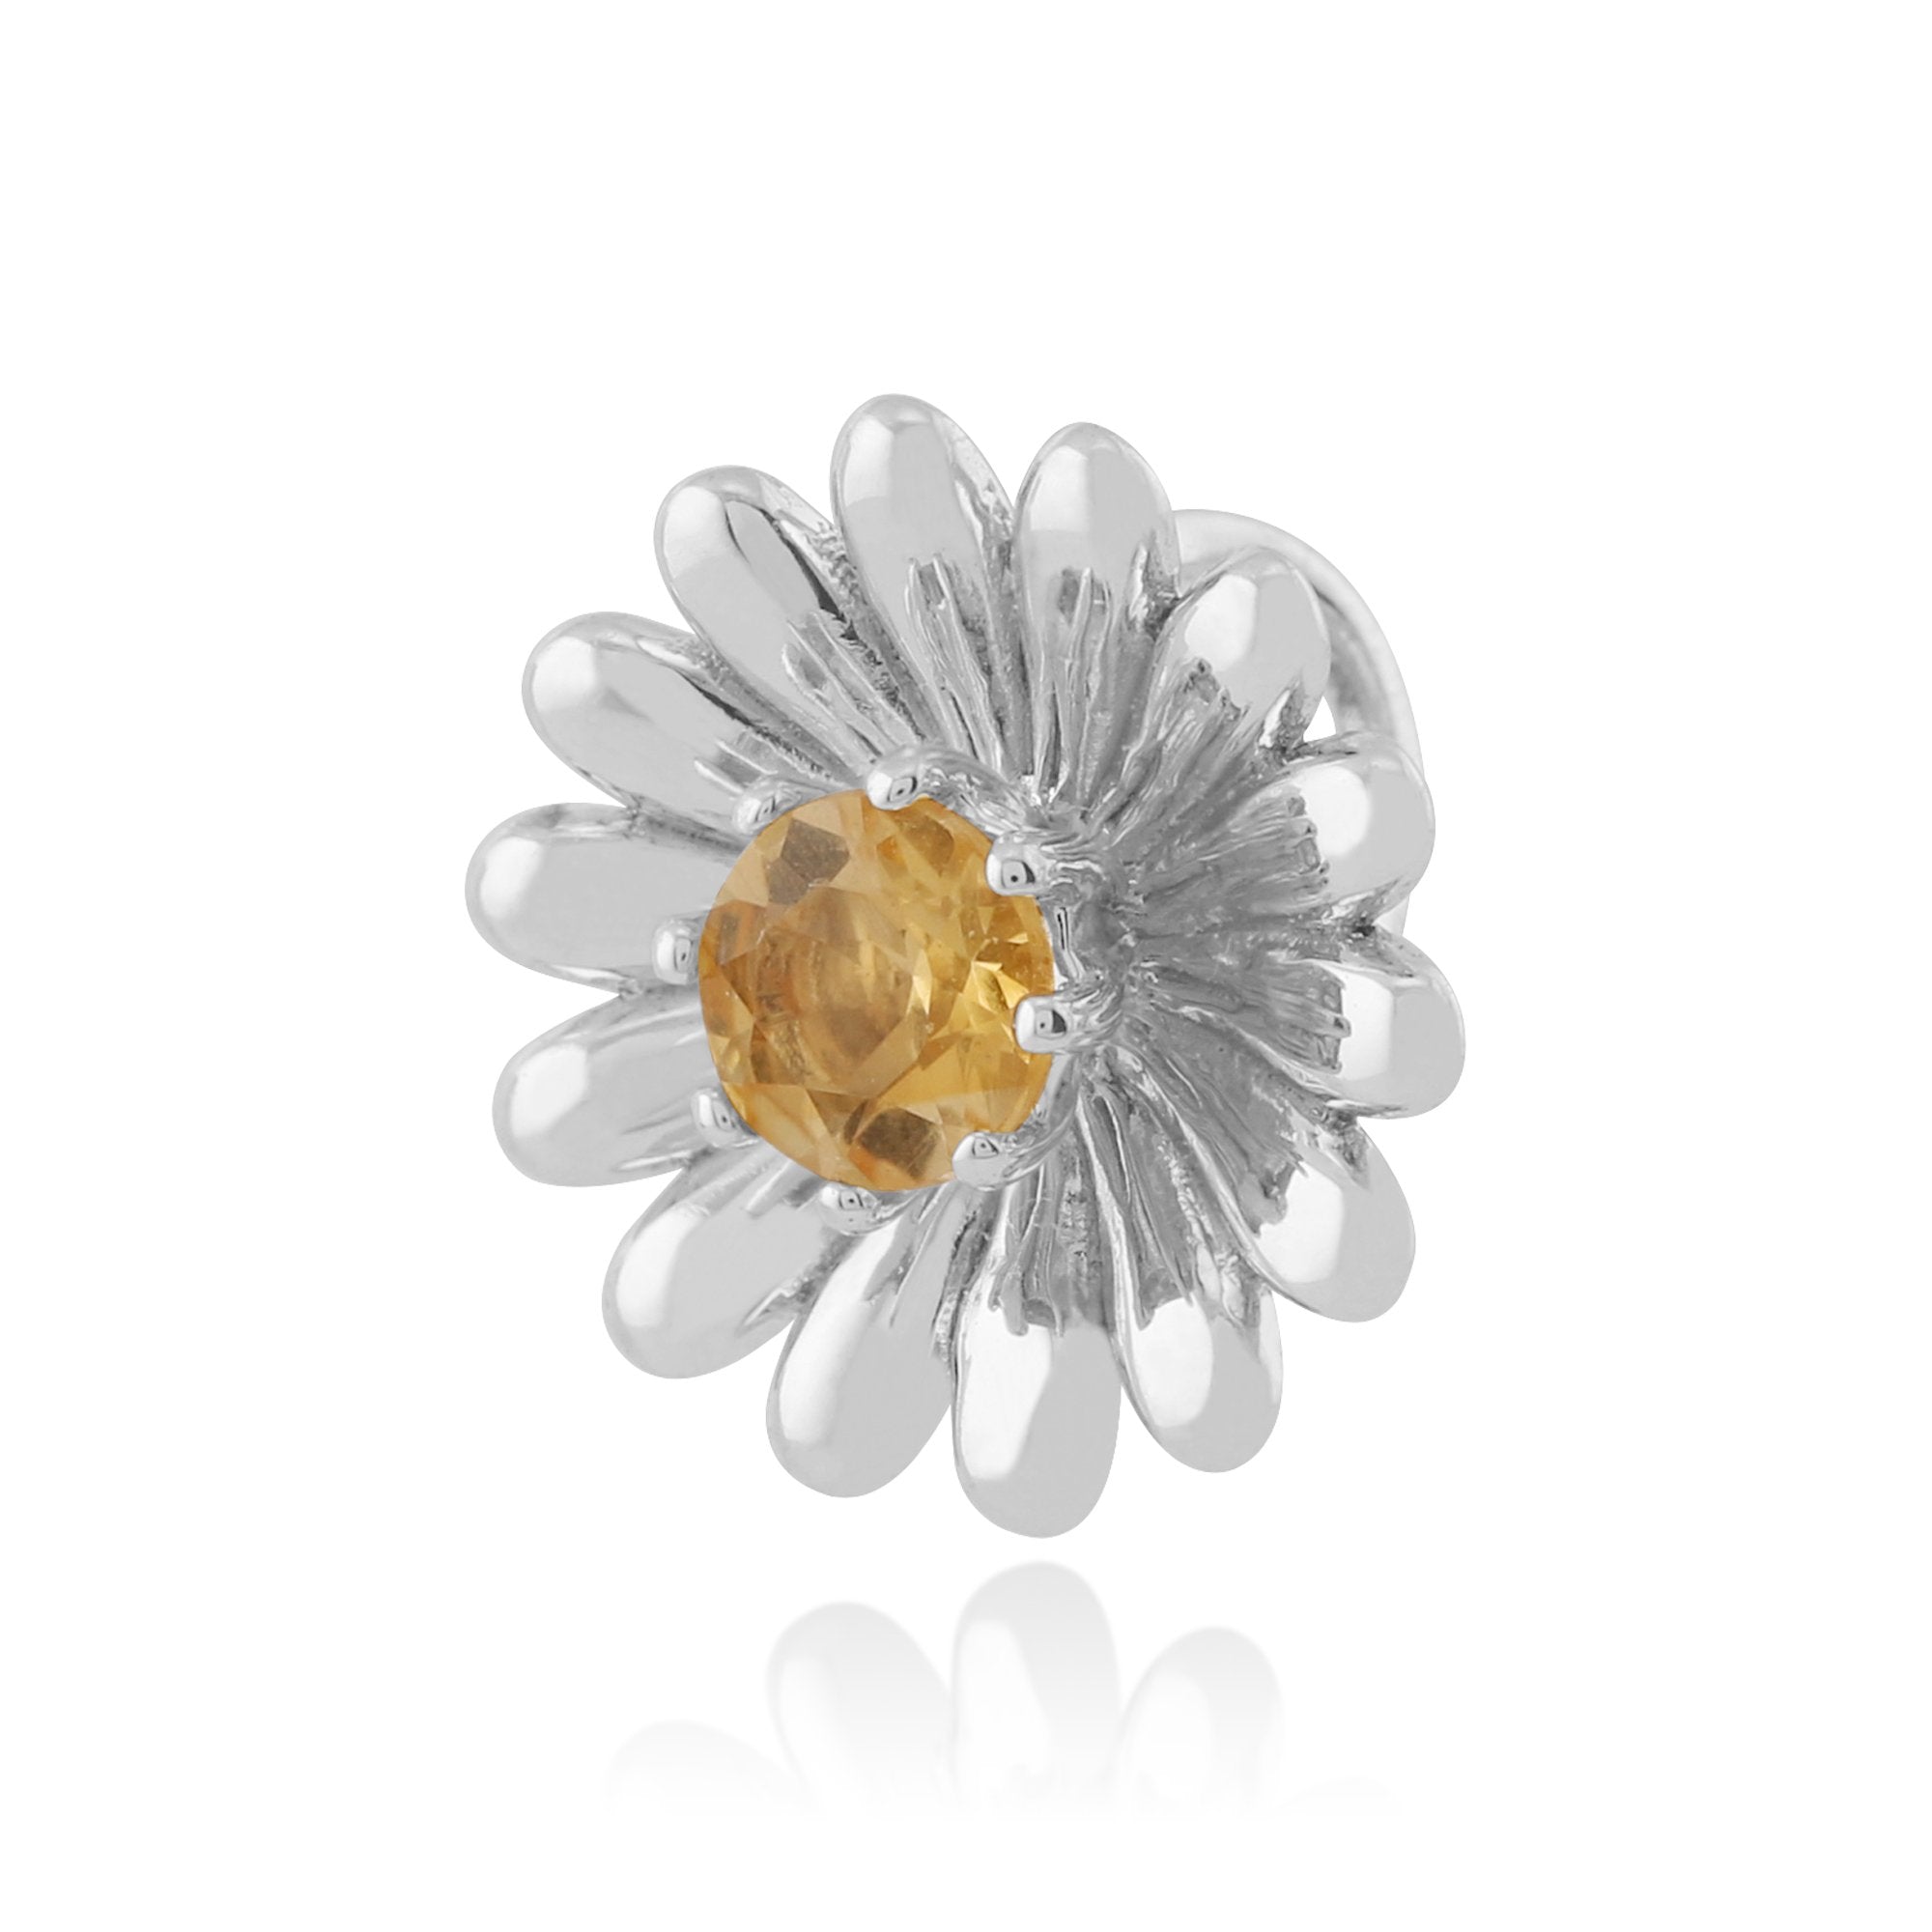 Floral Round Citrine Daisy Flower Single Stone Pendant in 925 Sterling Silver